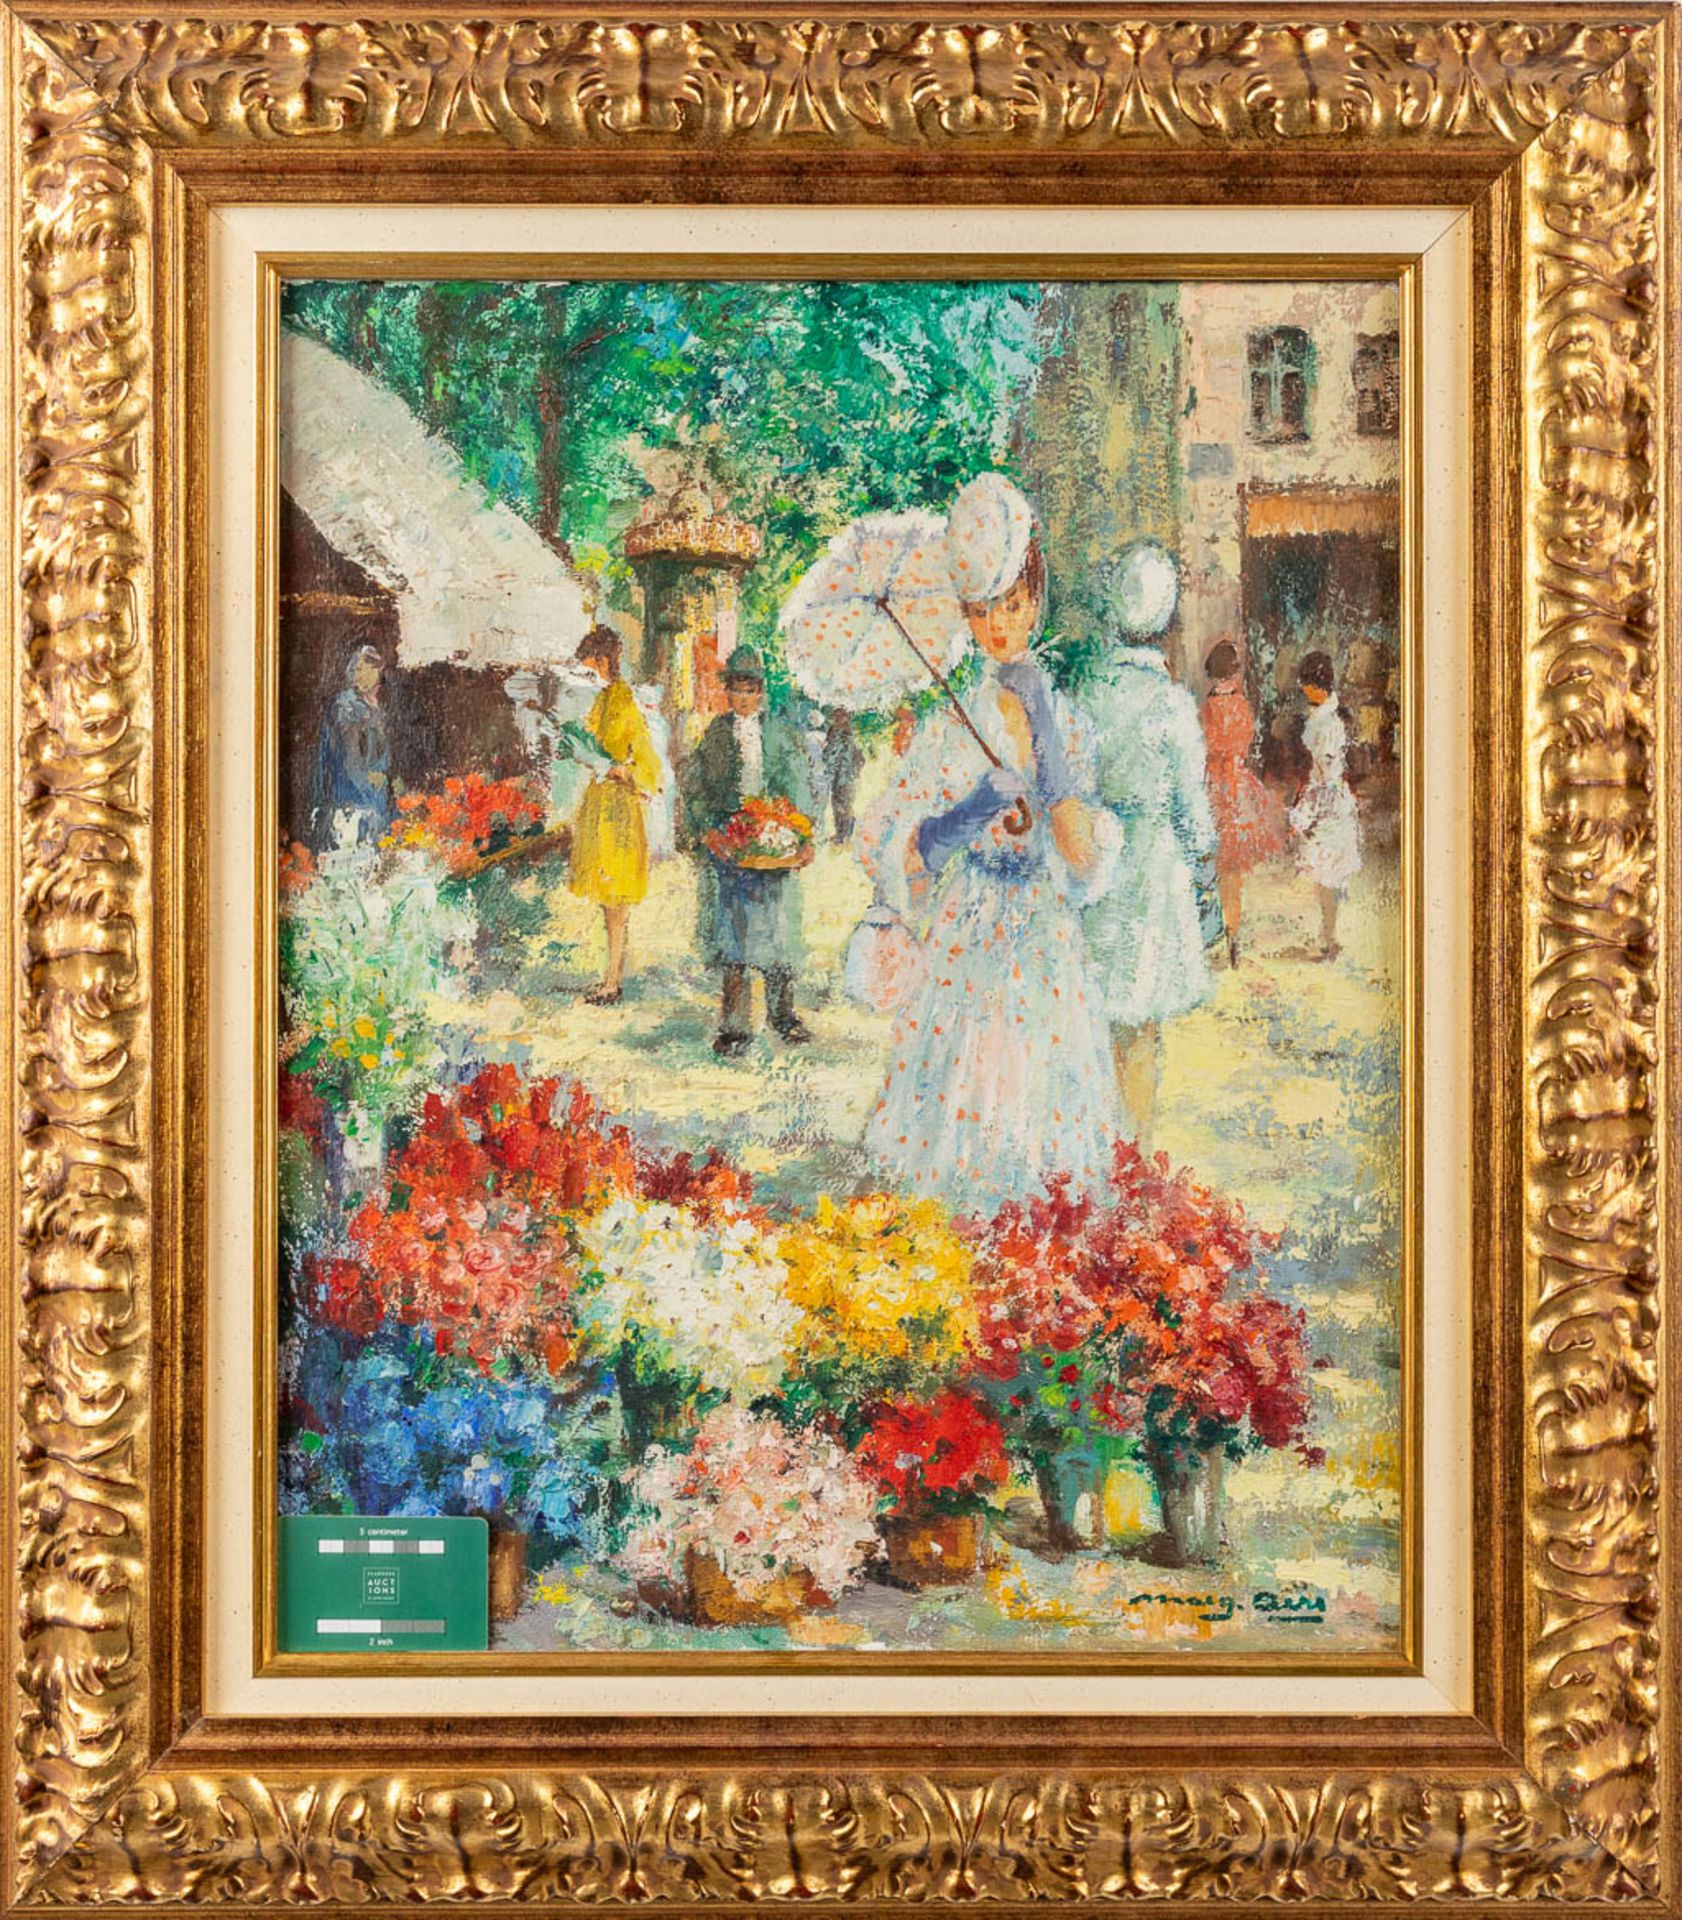 Marguerite AERS (1918-1995) 'The Flower Market' oil on canvas. (W:45 x H:55 cm) - Image 2 of 8